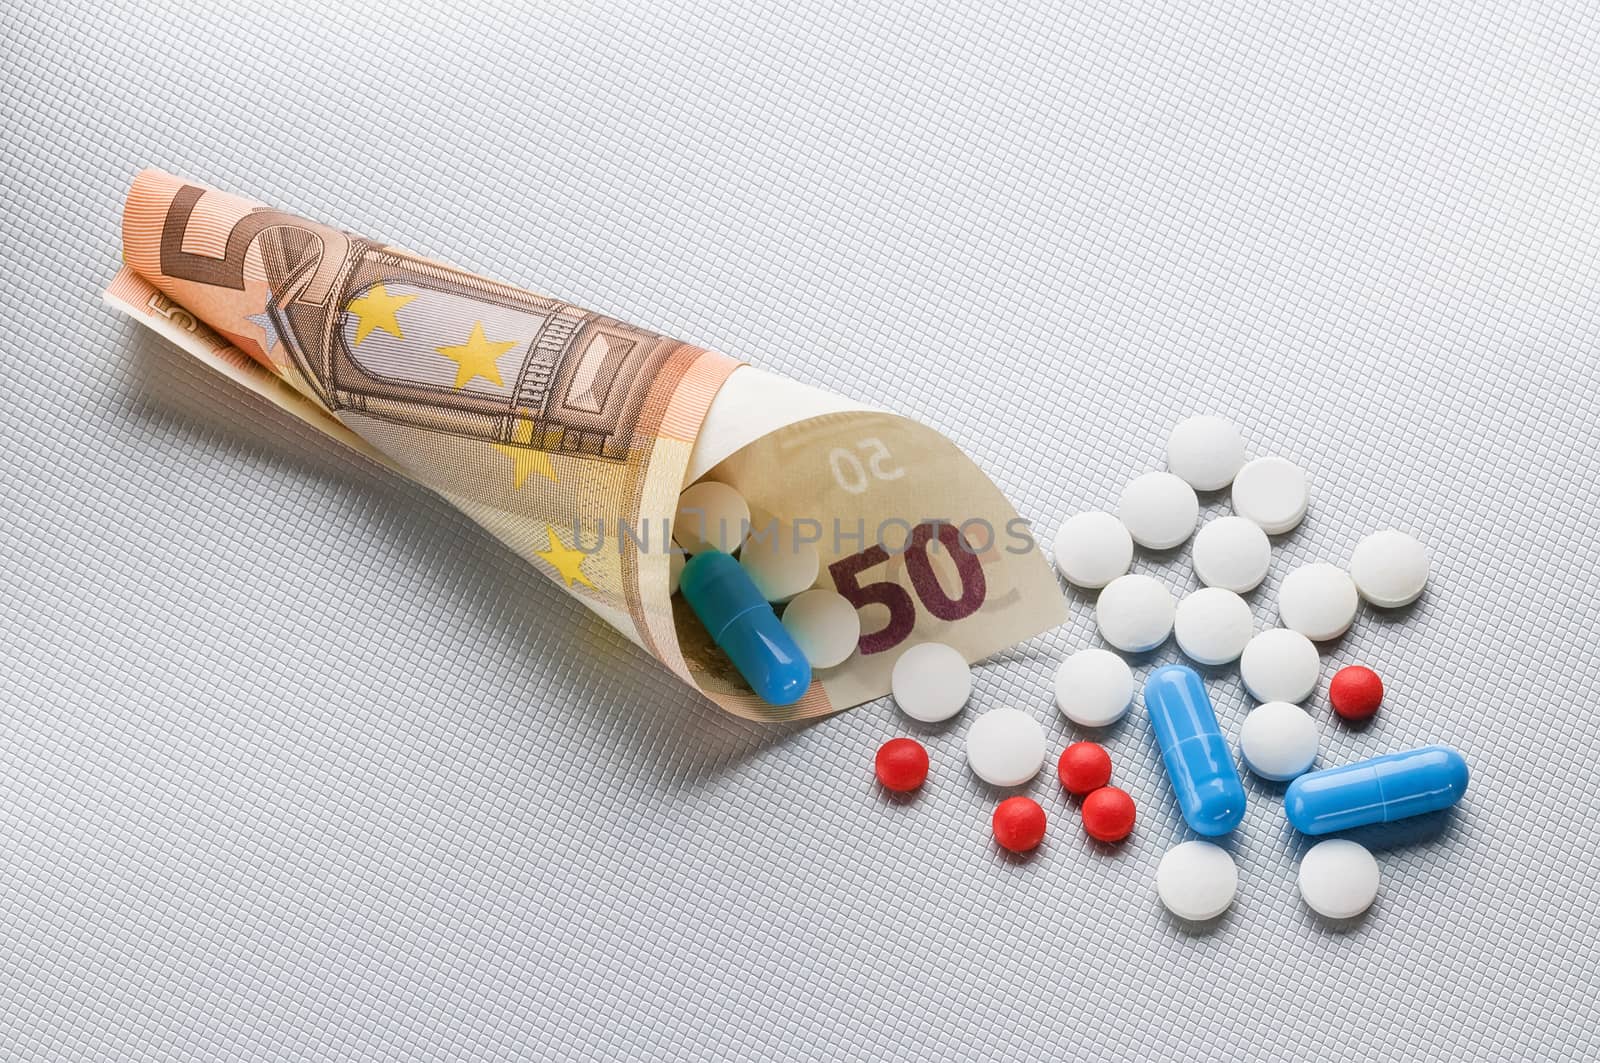 Pills and capsules with Euro money